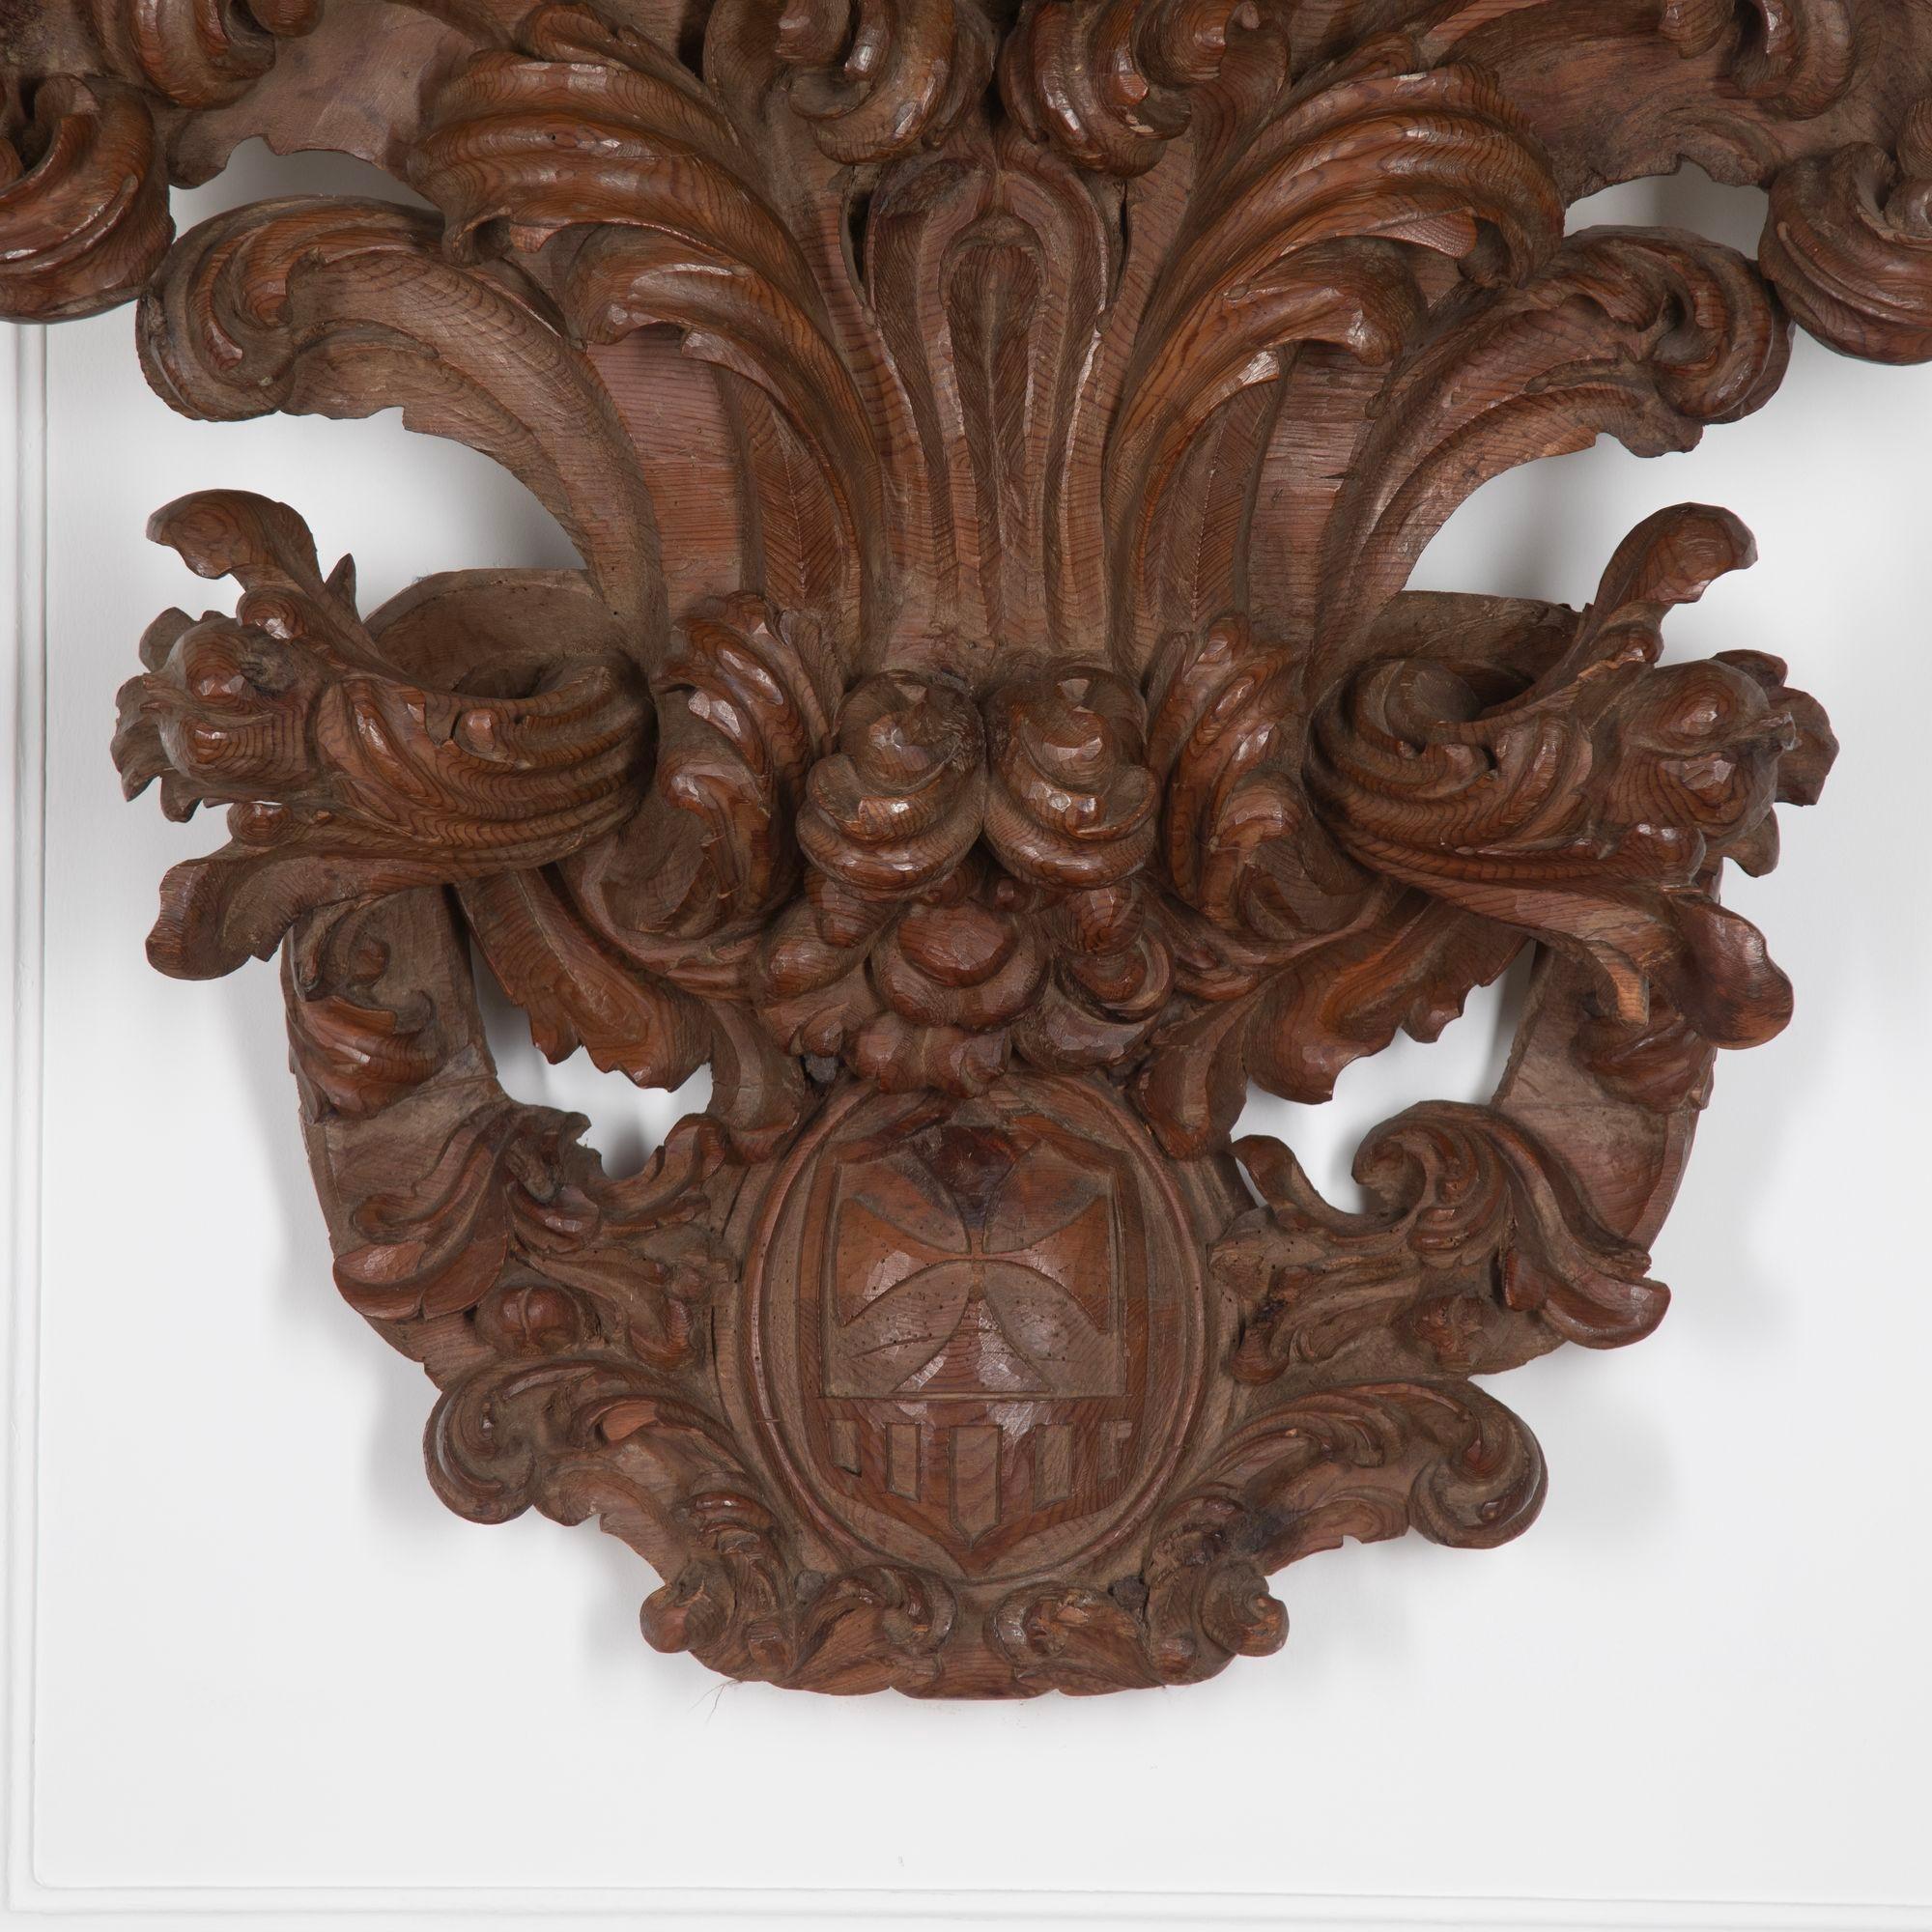 Early 19th Century Spanish armorial shield carved in a baroque style in pine.
Circa 1820.